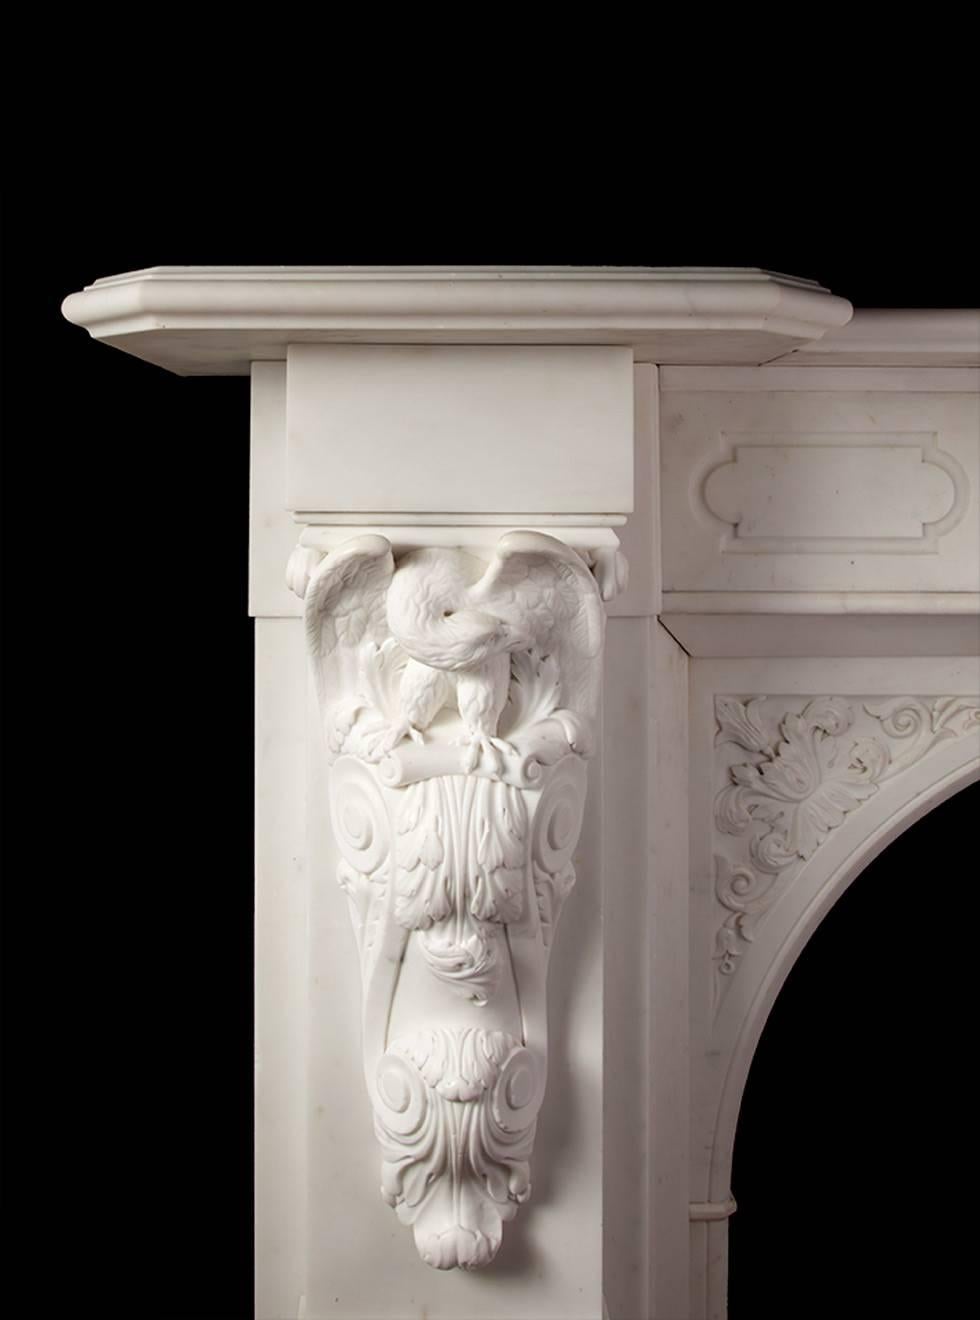 Impressive mid-19th century carved statuary marble fireplace. The fireplace has a deep and moulded break fronted shelf, upheld by two large carved corbels with perched eagles, preening themselves. The centre plaque depicts Zeus with his trident, in